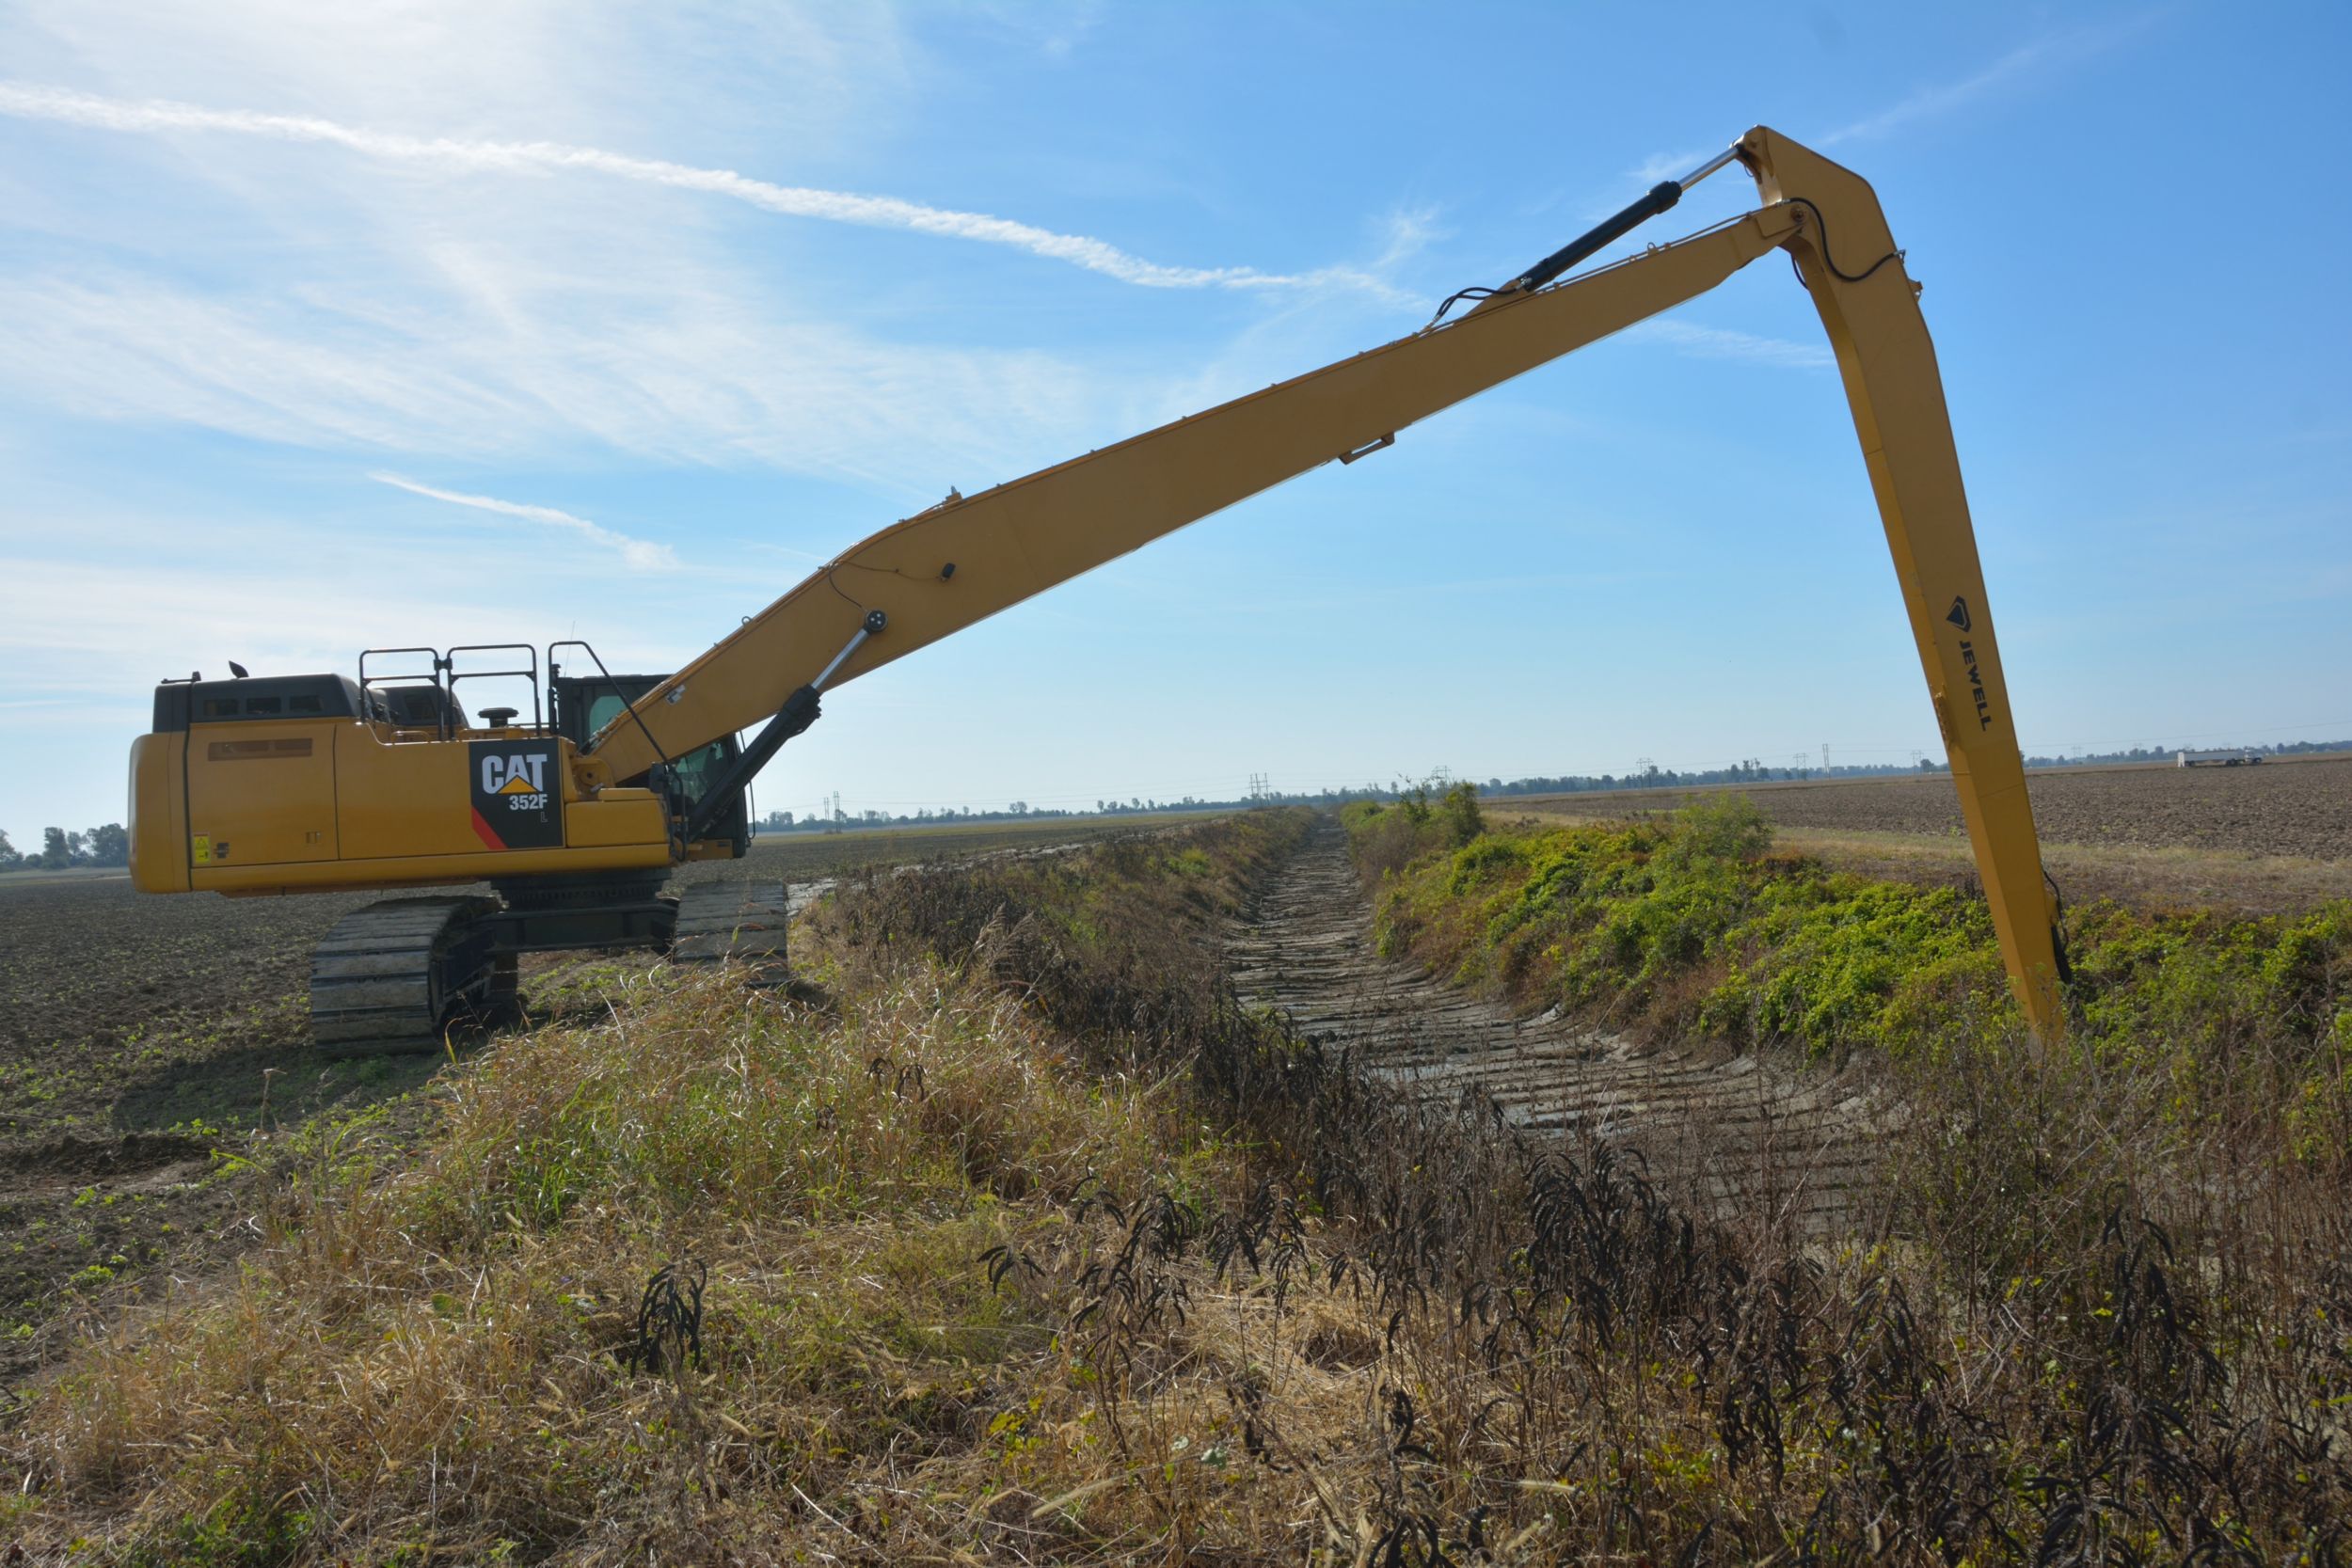 Drainage ditches are maintained by Cat® hydraulic excavators equipped with long reach booms from 60 to 82 feet in length and fitted with ditch cleaning buckets and/or specialty designed mowers.